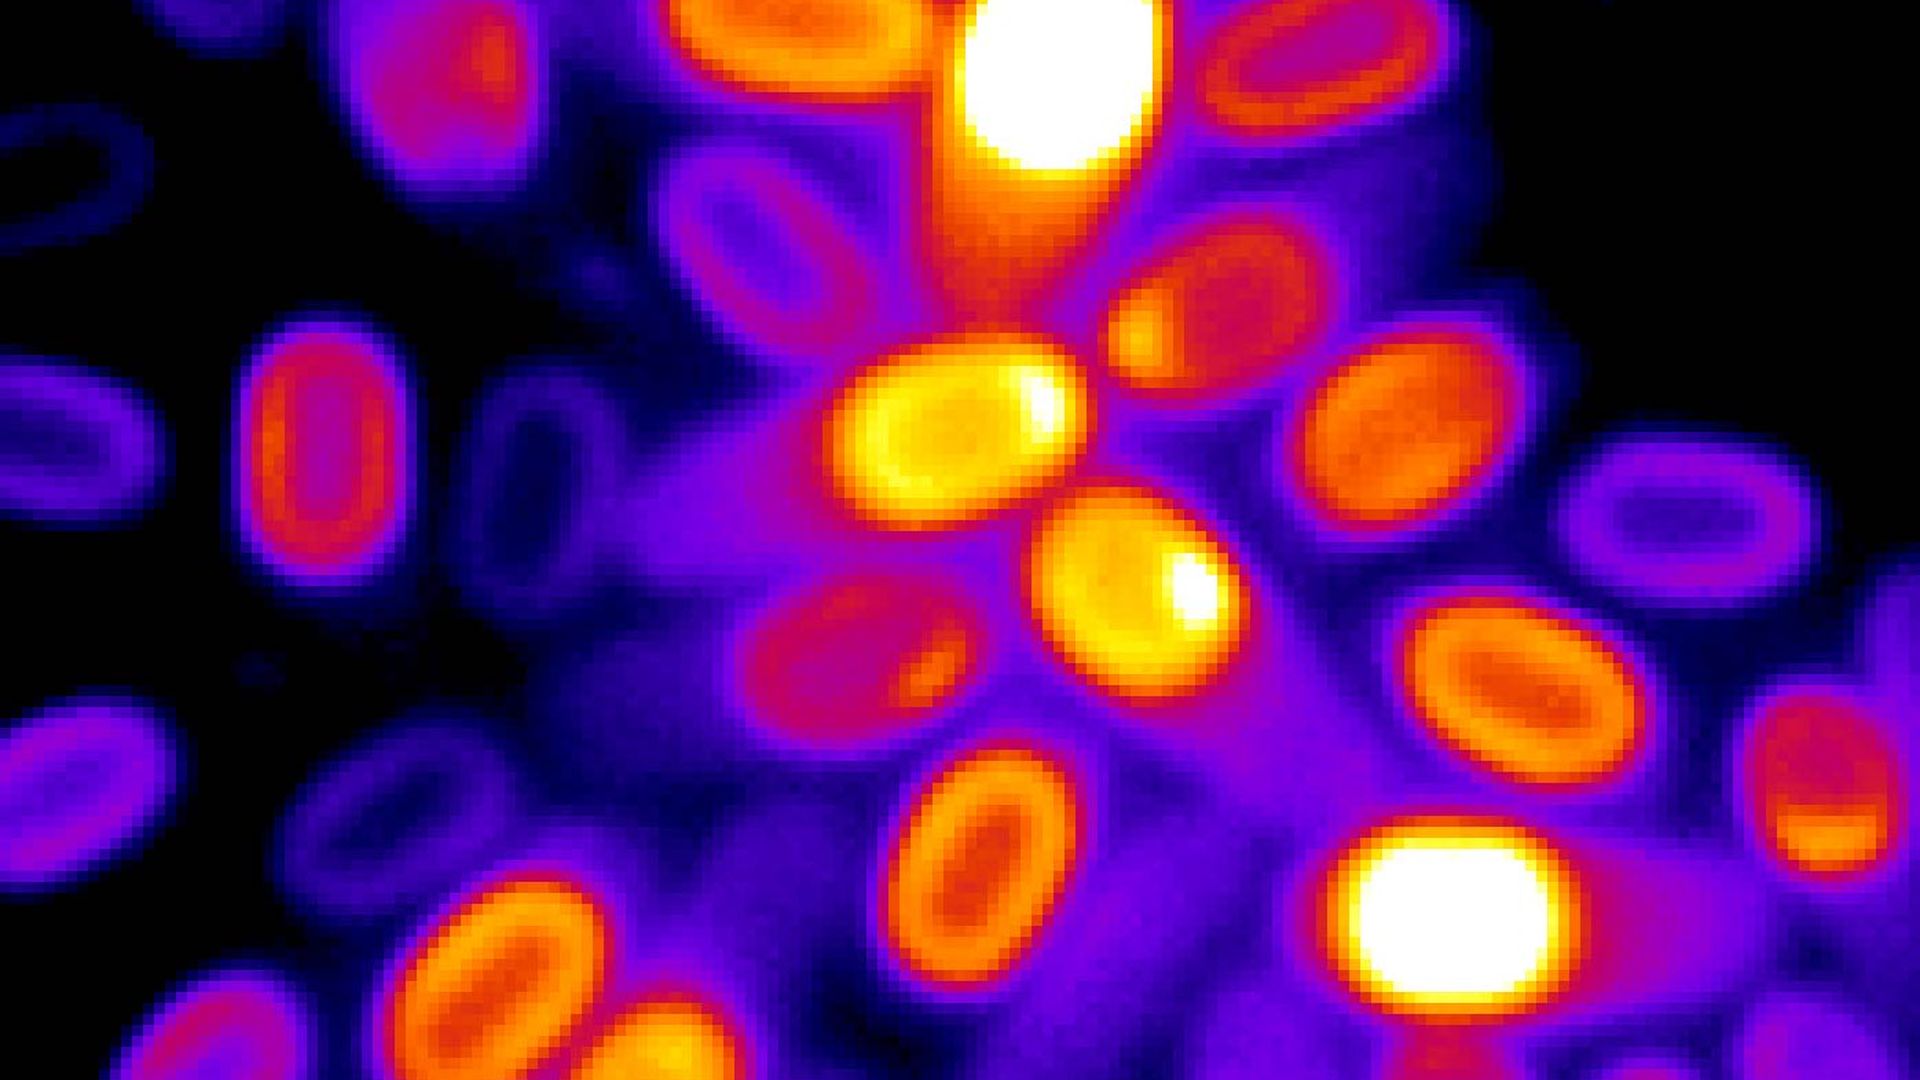 Microscopy image of several spores with their electrochemical potential color coded according to value.